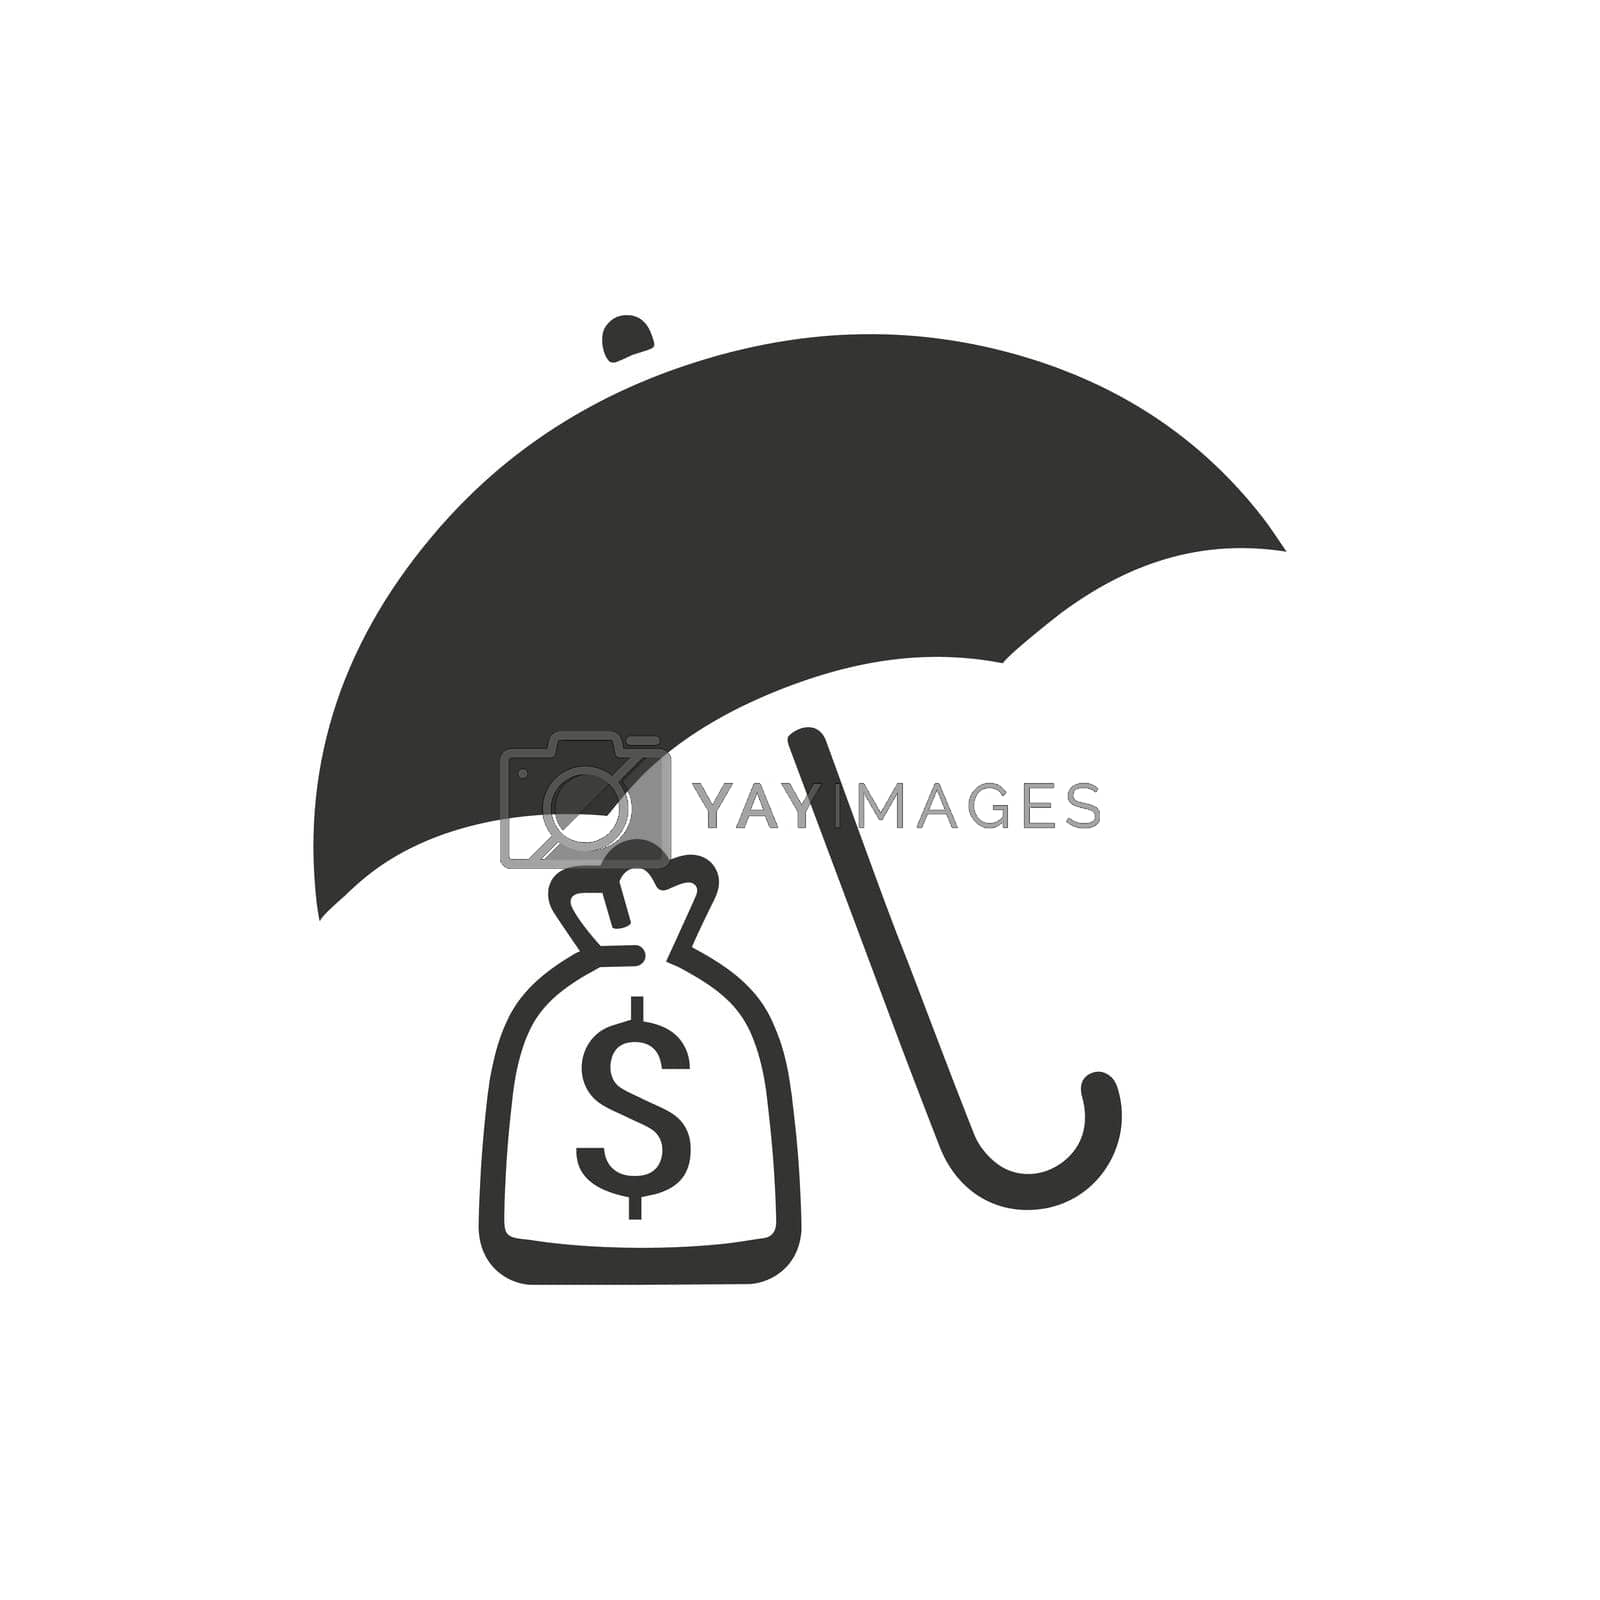 Royalty free image of Financial Protection Icon by delwar018